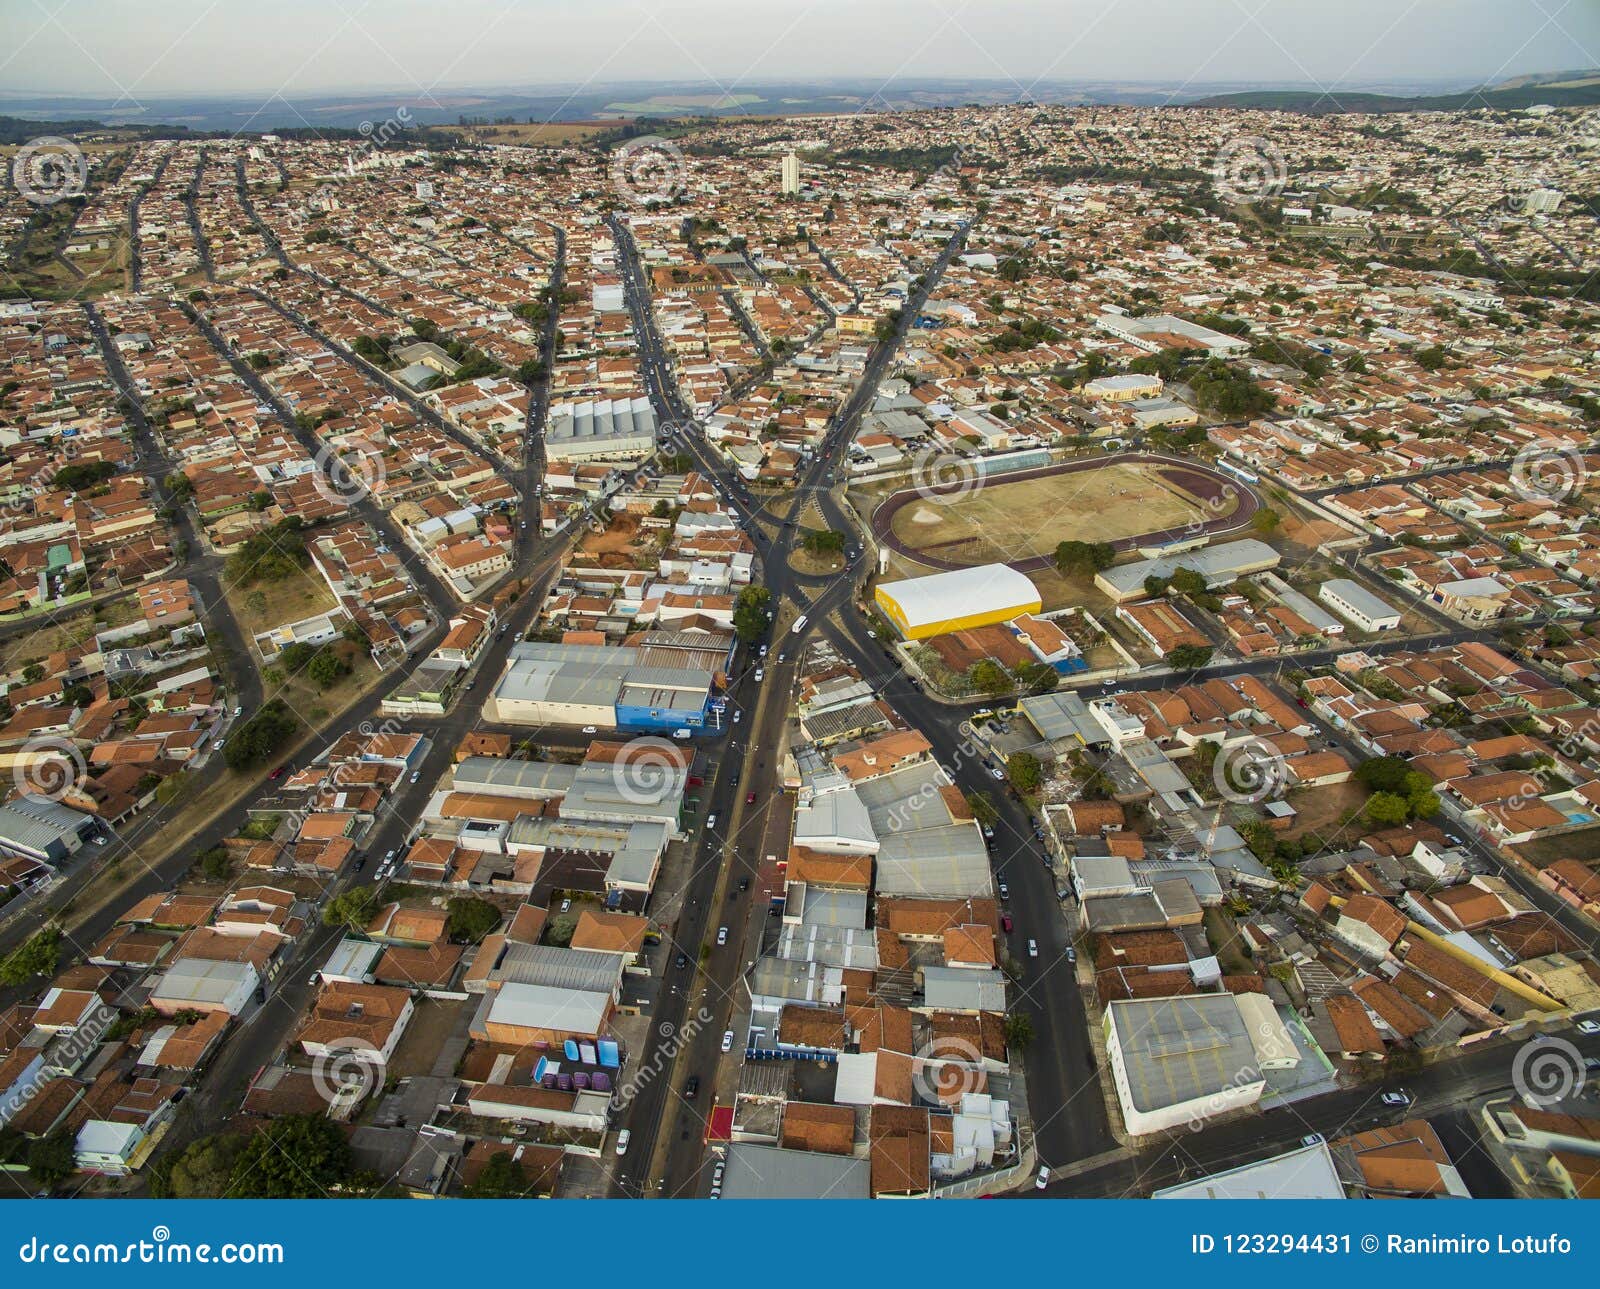 small cities in south america, city of botucatu in the state of sao paulo, brazil